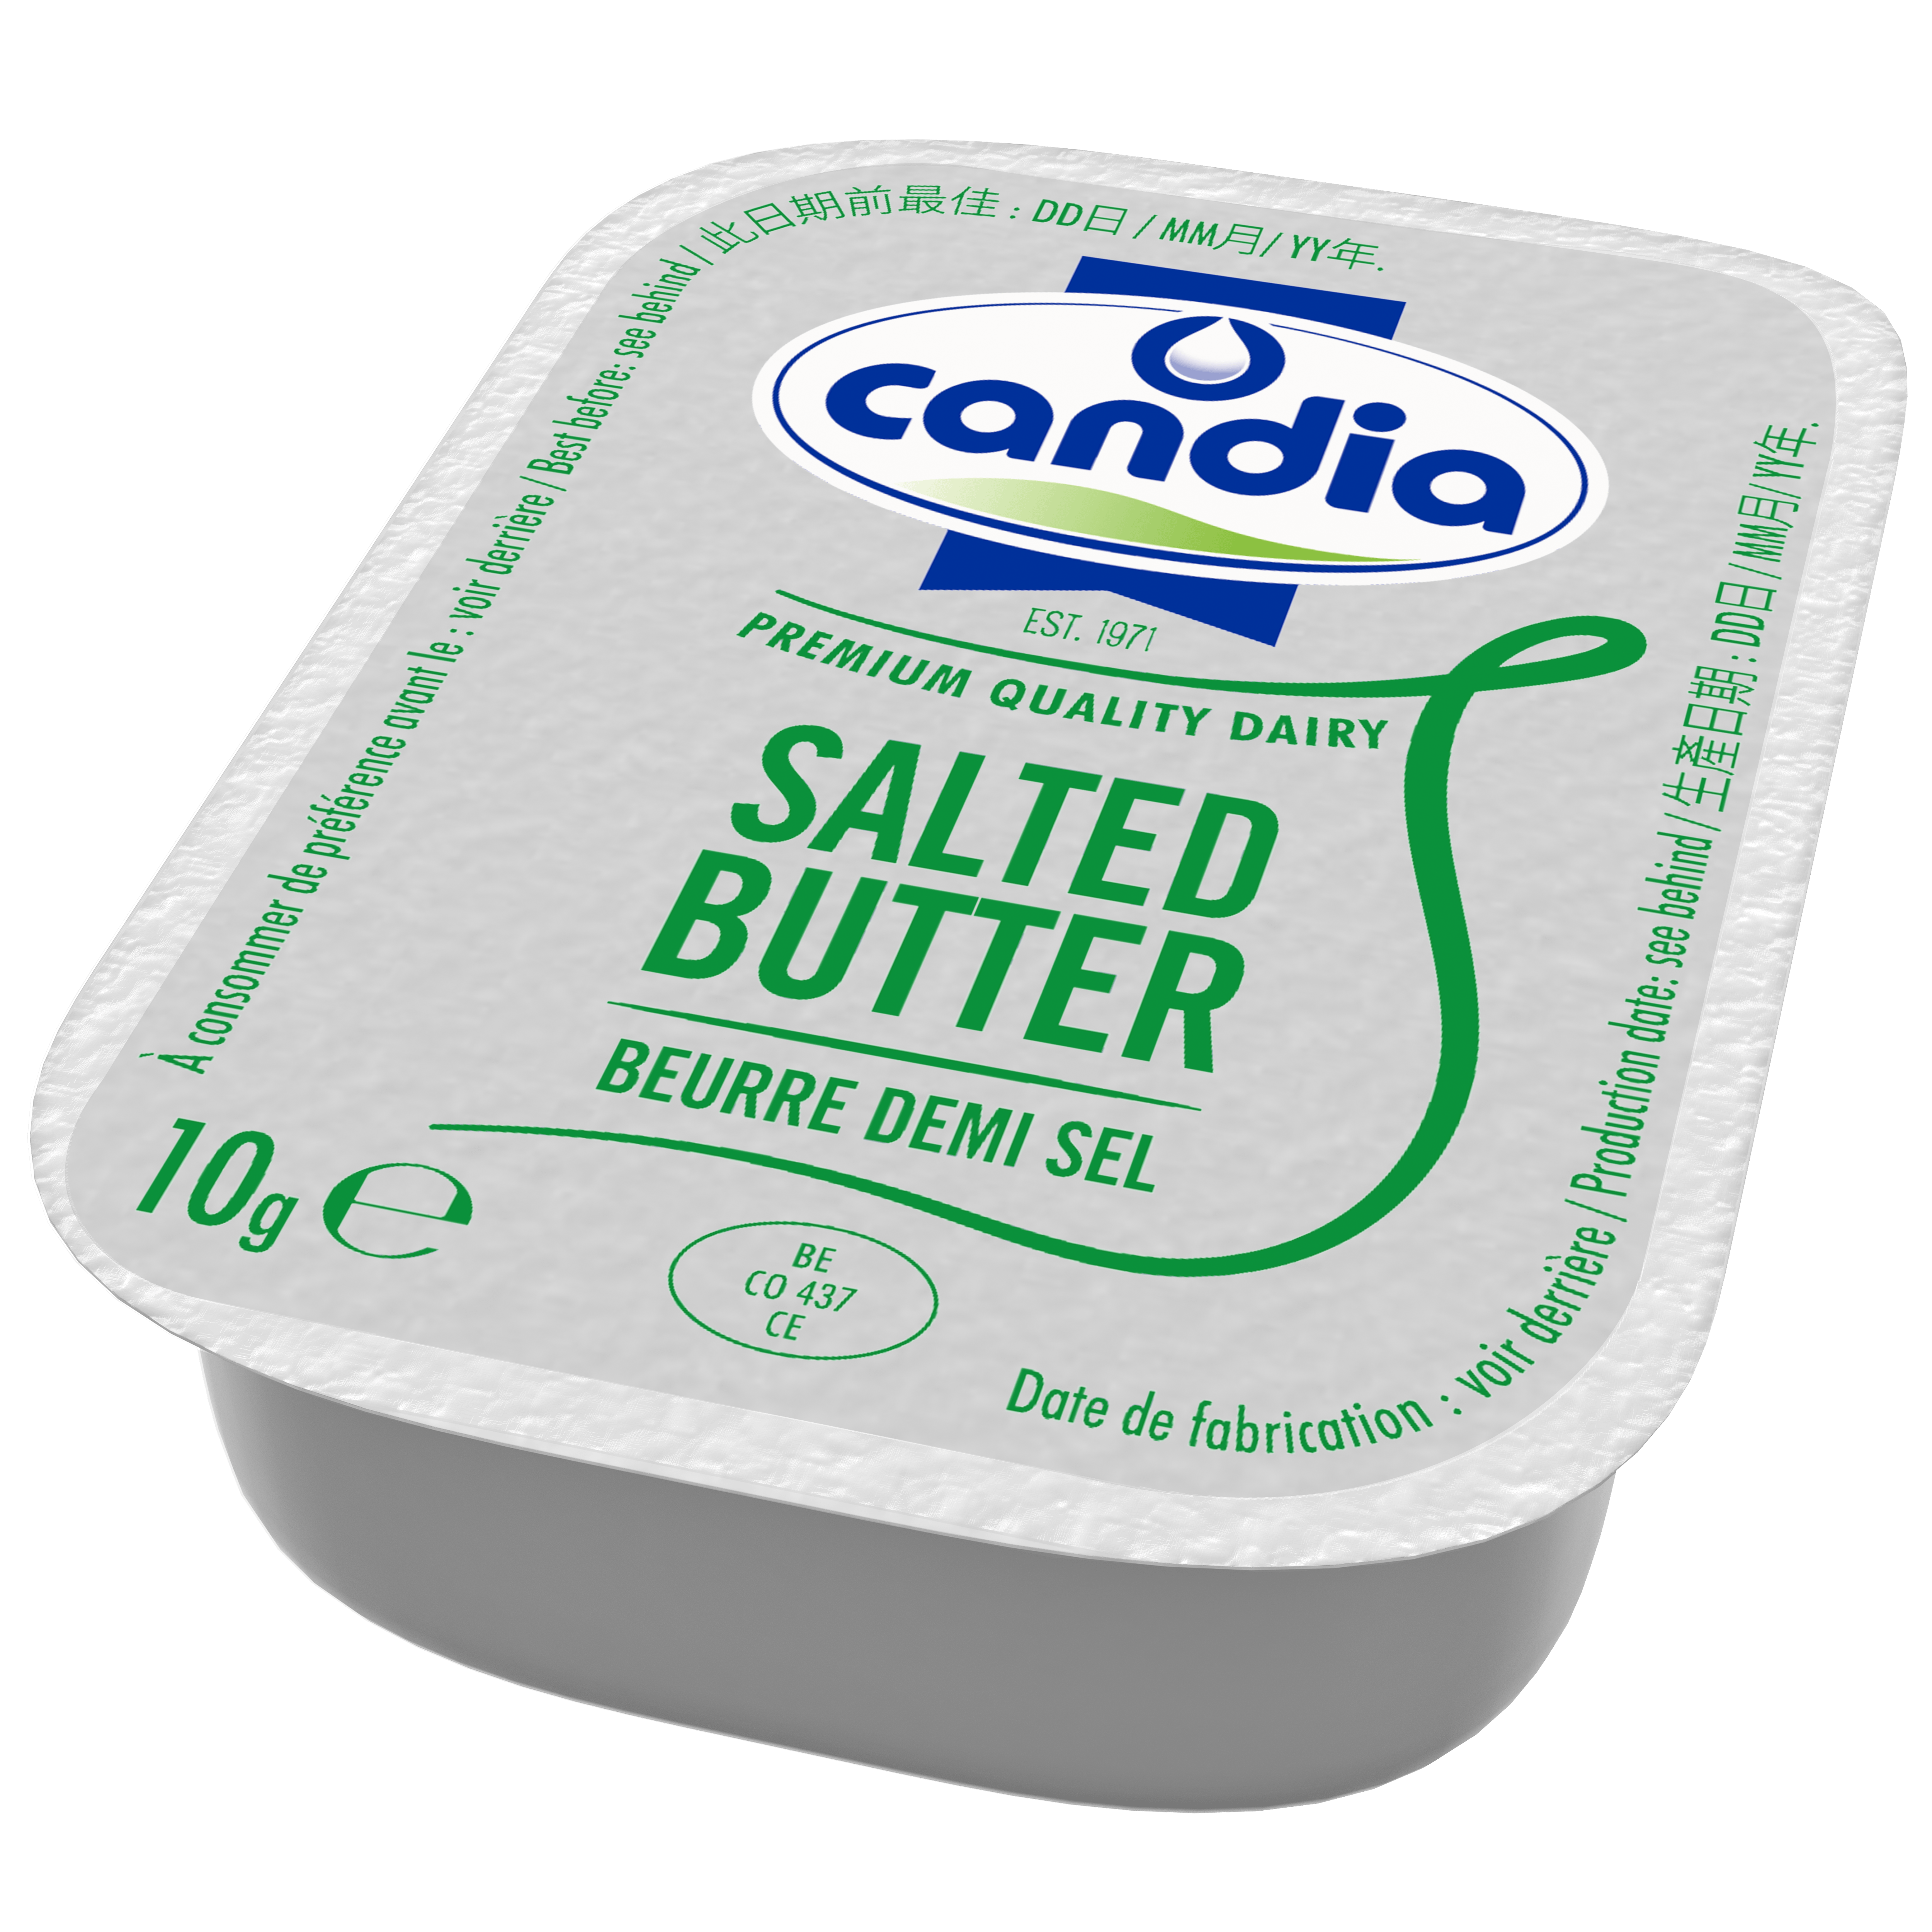 TRADITIONAL SALTED BUTTER